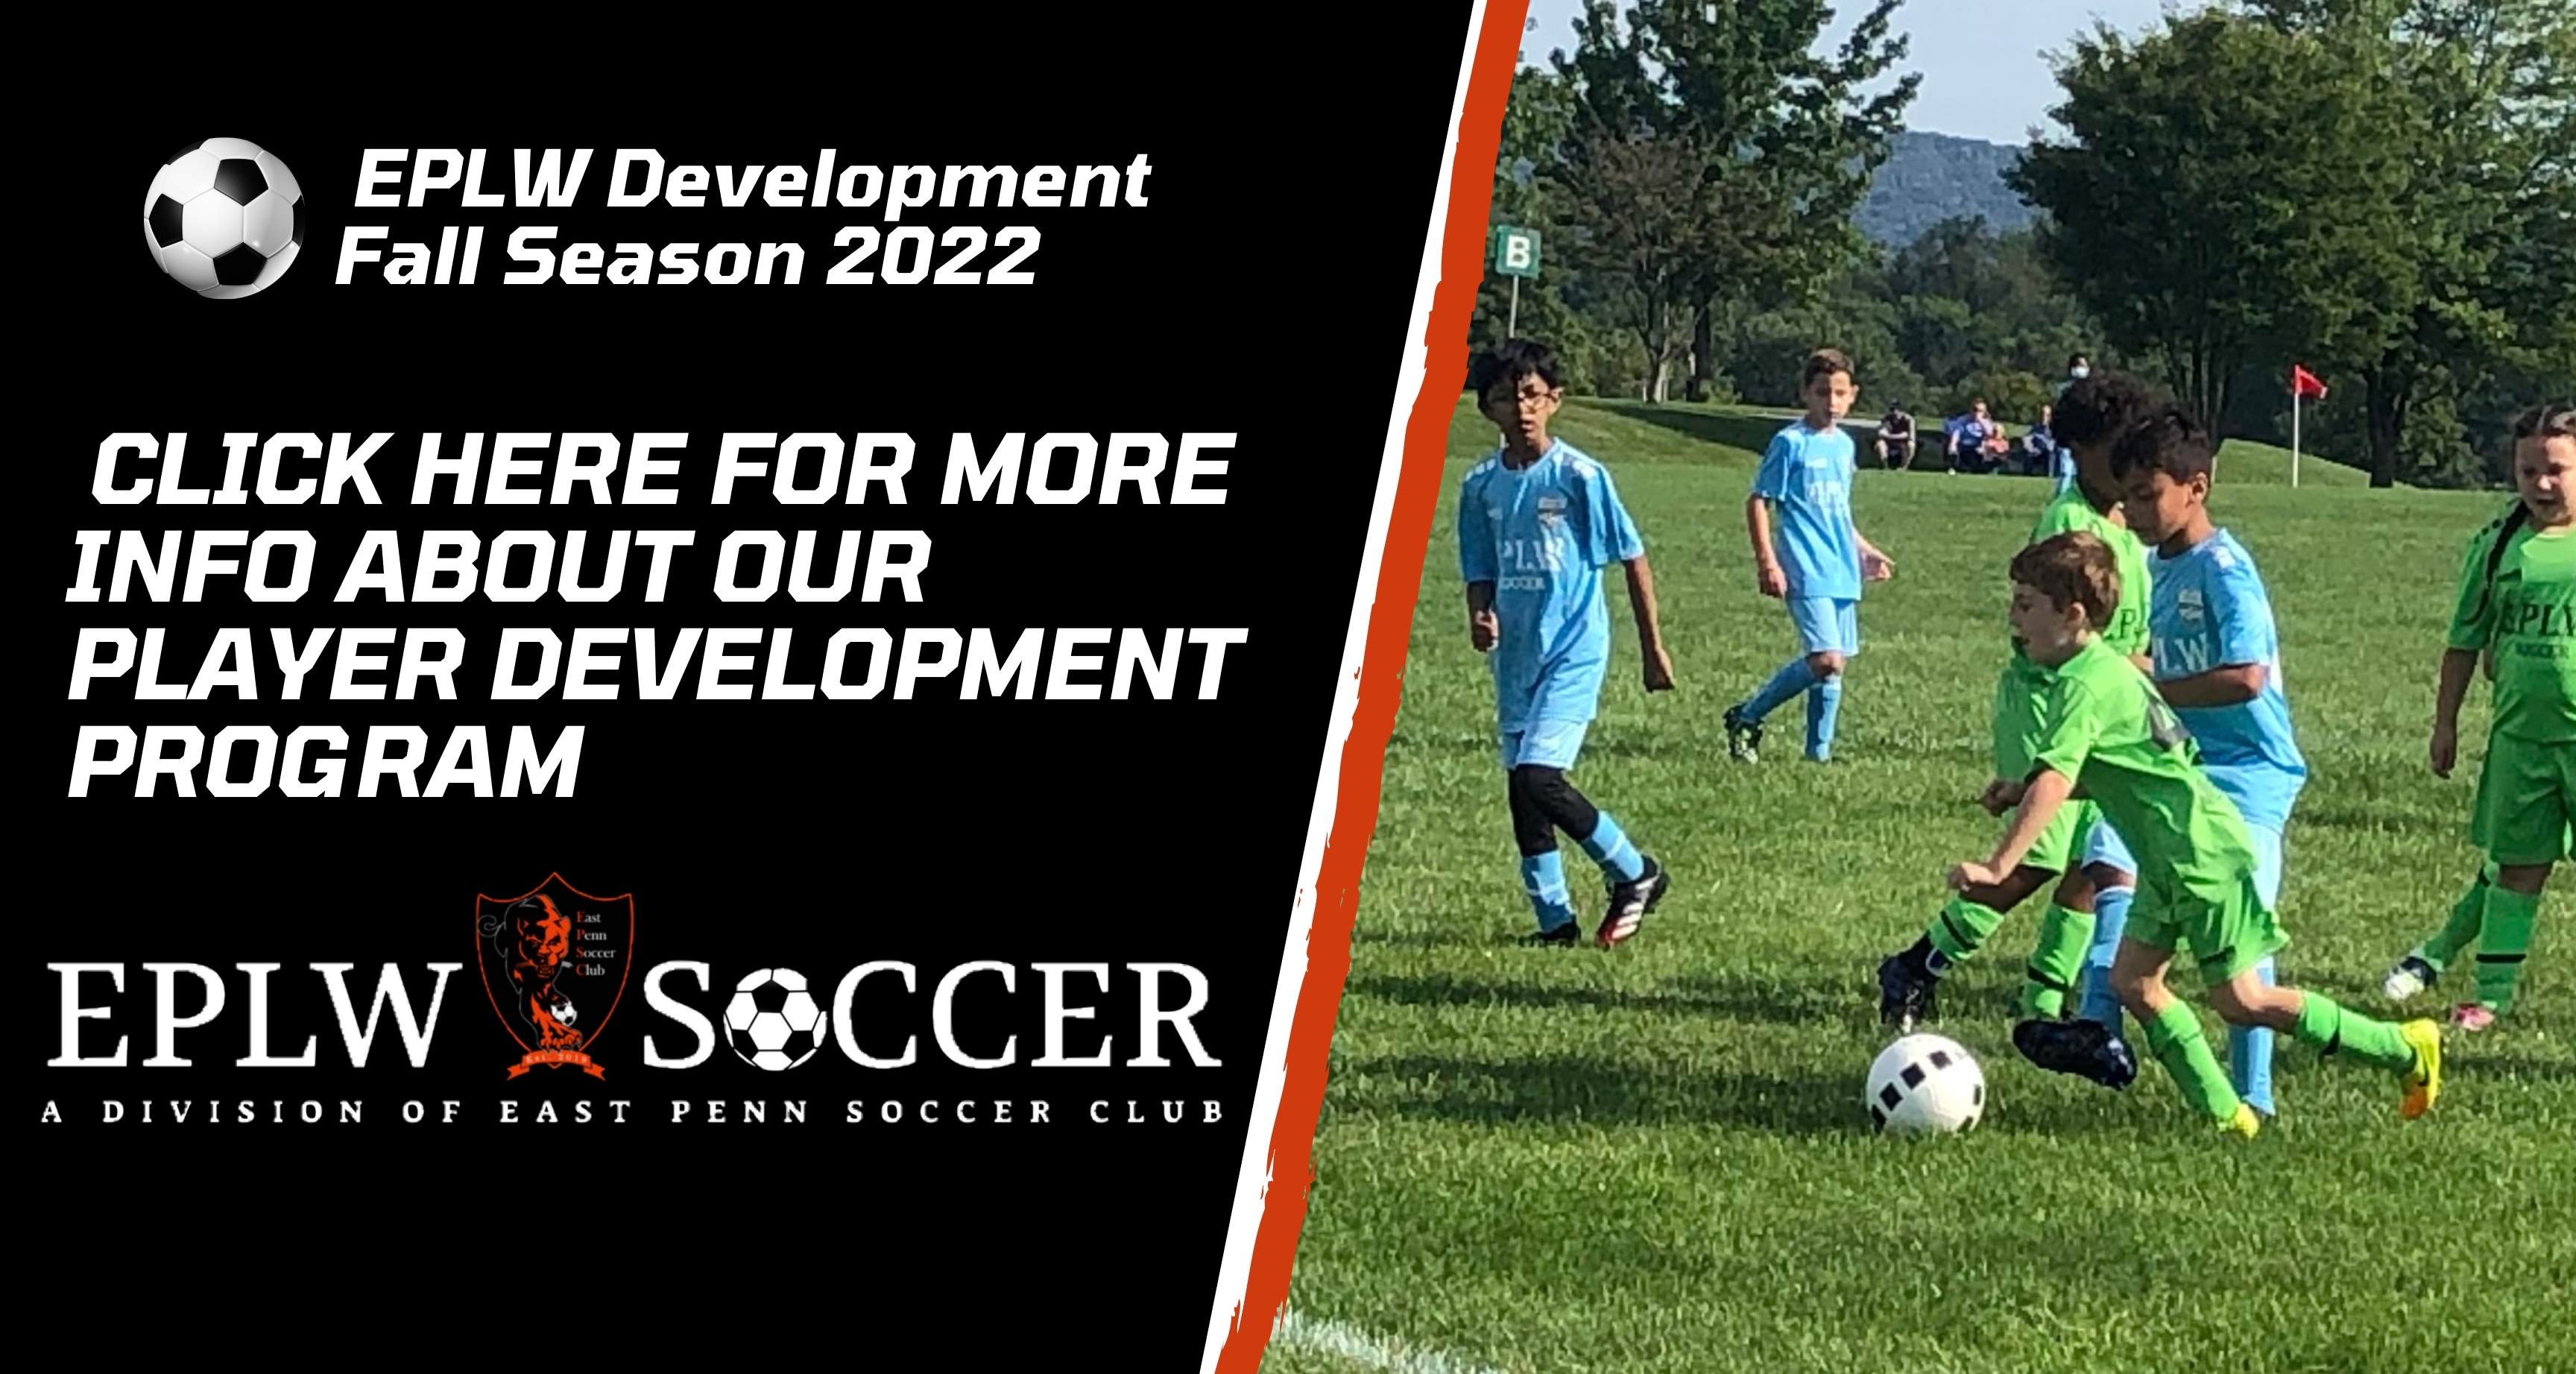 FREQUENTLY ASKED QUESTIONS - EPLW Fall Season 2022